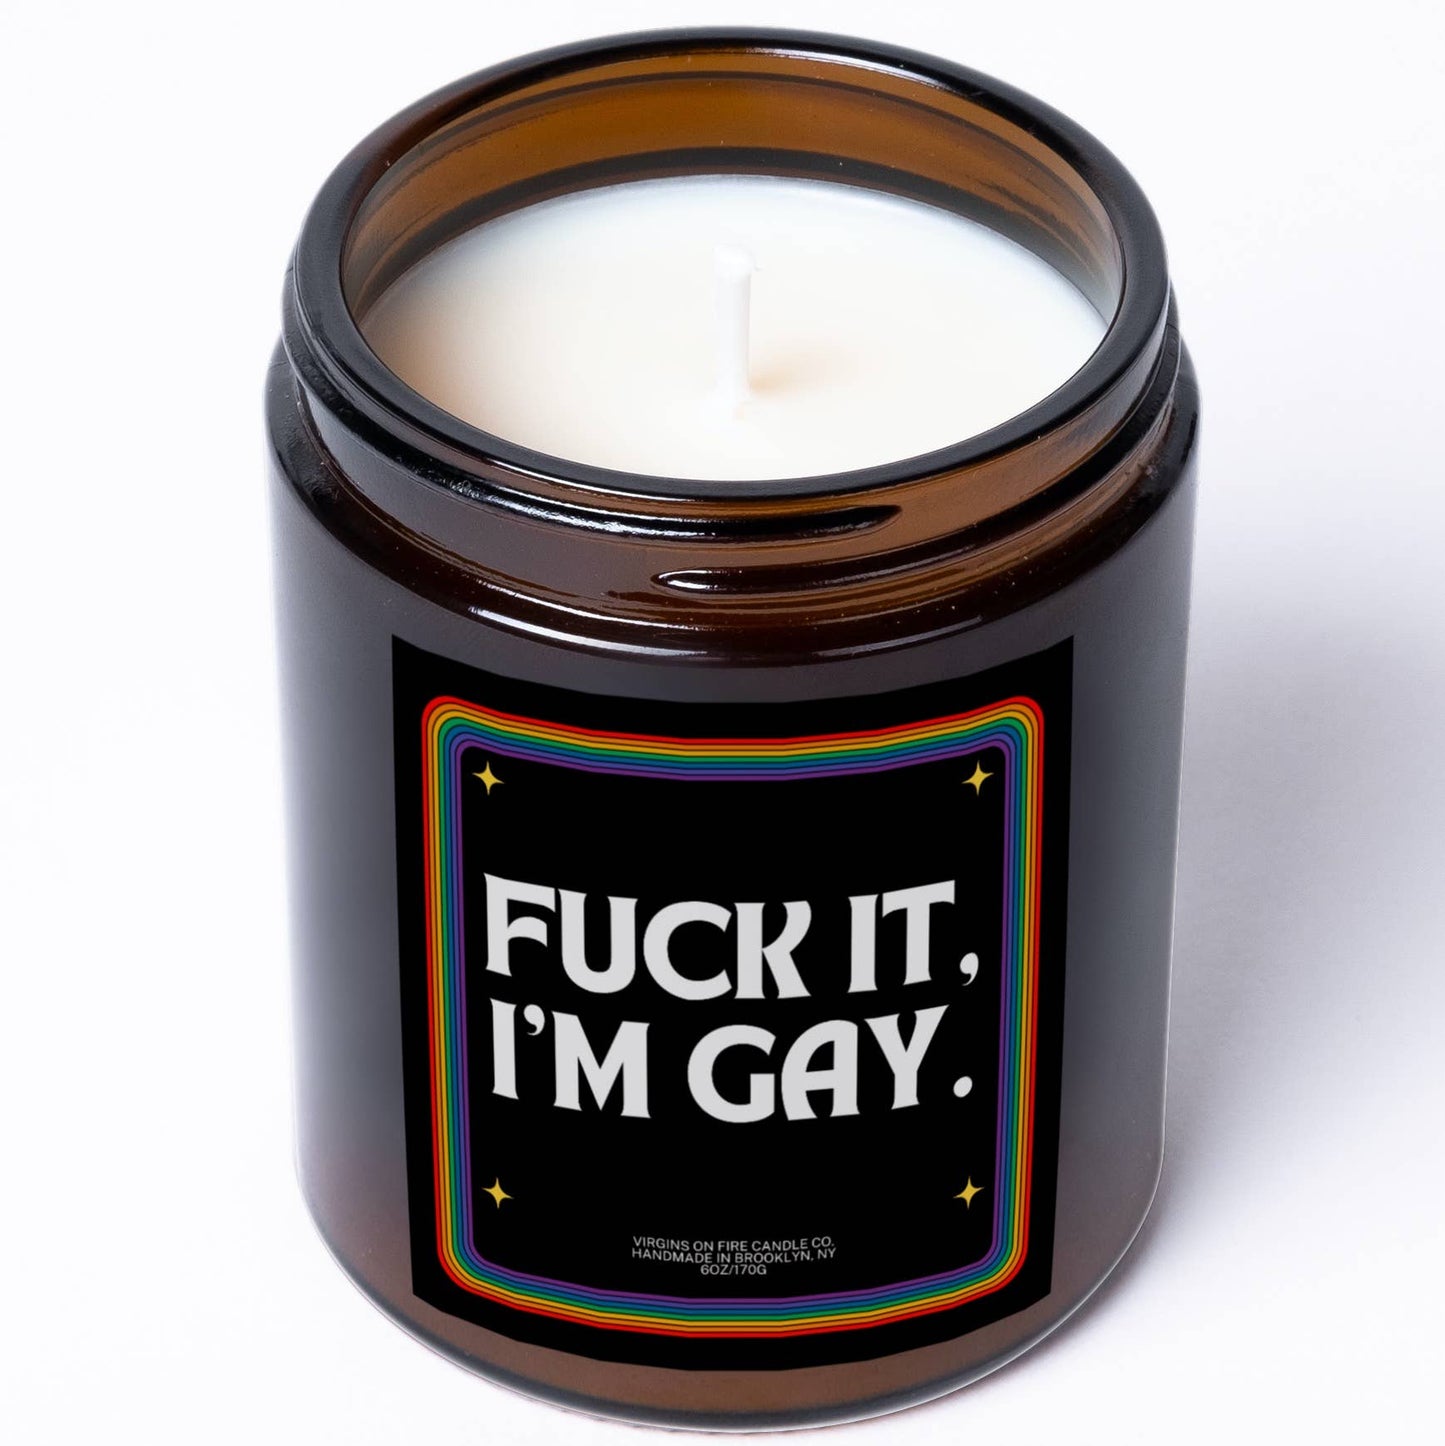 Virgins On Fire Candle Co. - FUCK IT, I'M GAY (Tonka) 🏳️‍🌈 - LGBTQ+ / Gay Pride Candle